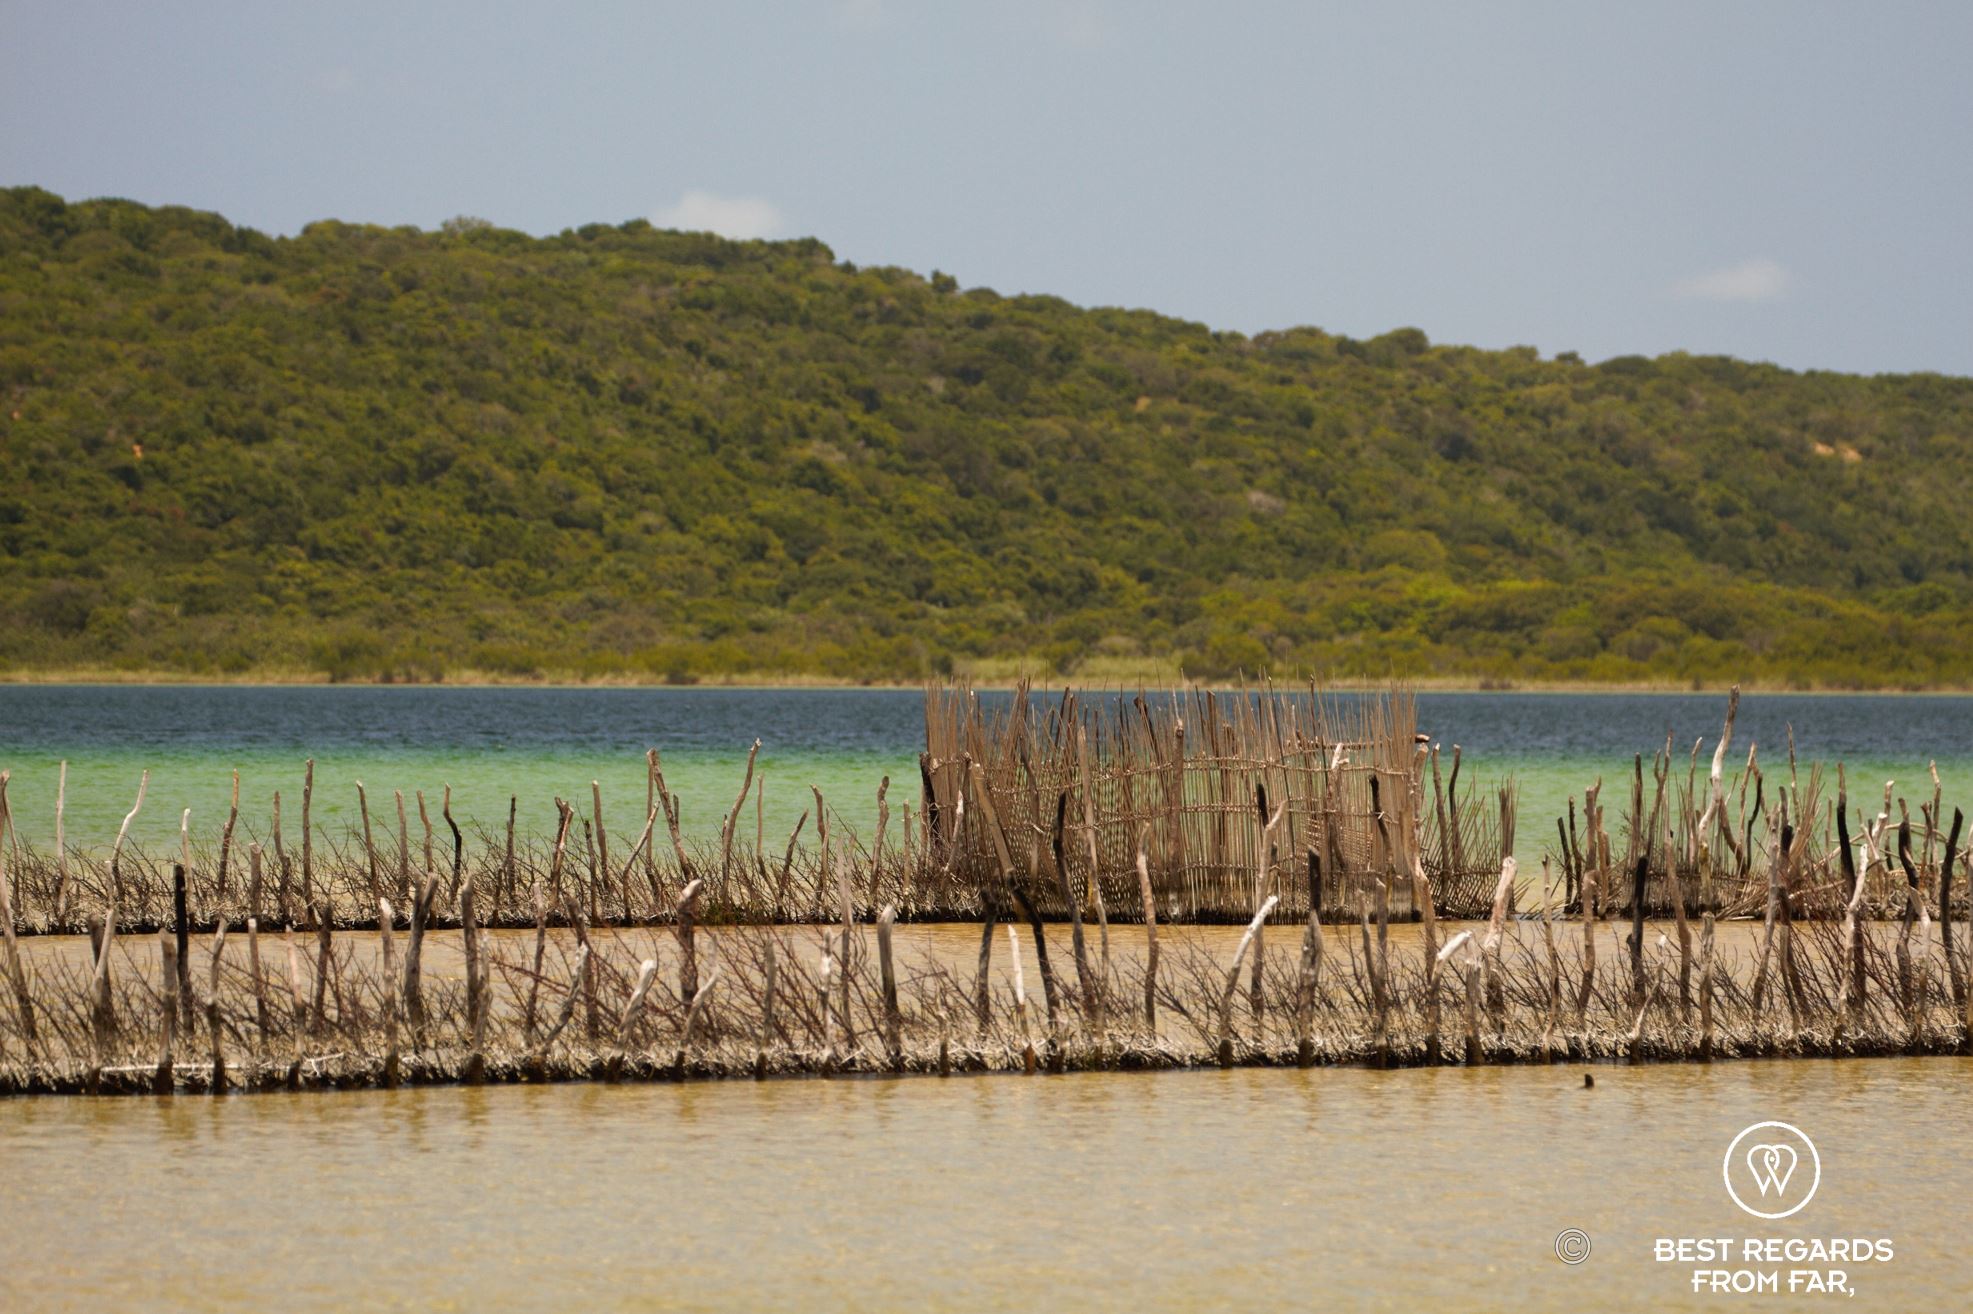 Fish traps in the lakes of Kosi Bay, South Africa